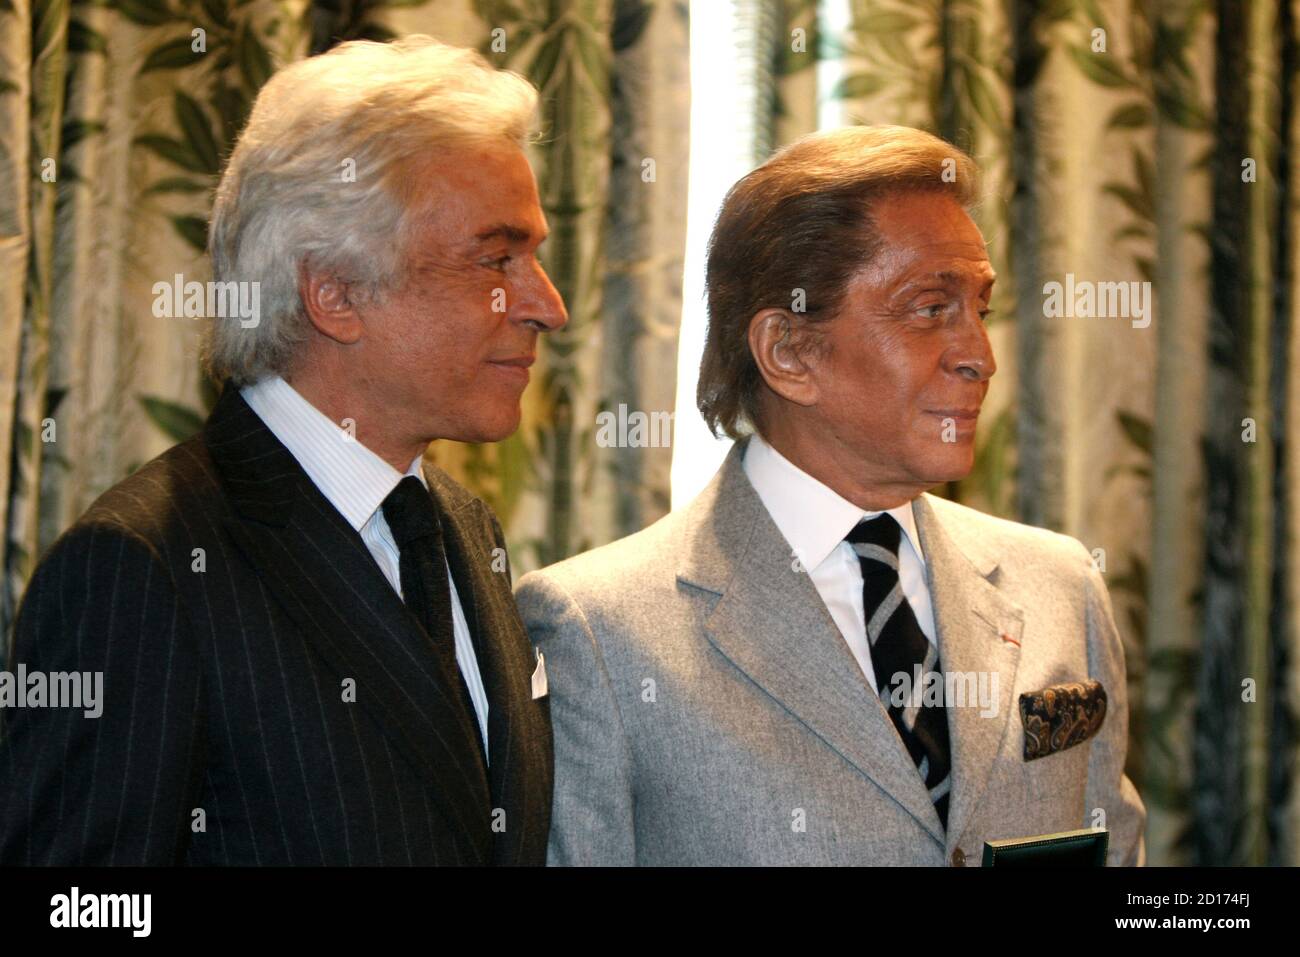 Italian designer Valentino (R) attends a ceremony with his business partner  Giancarlo Giammetti where Valentino was awarded the Medal of Paris at the  Hotel de Ville in the French capital, January 24,